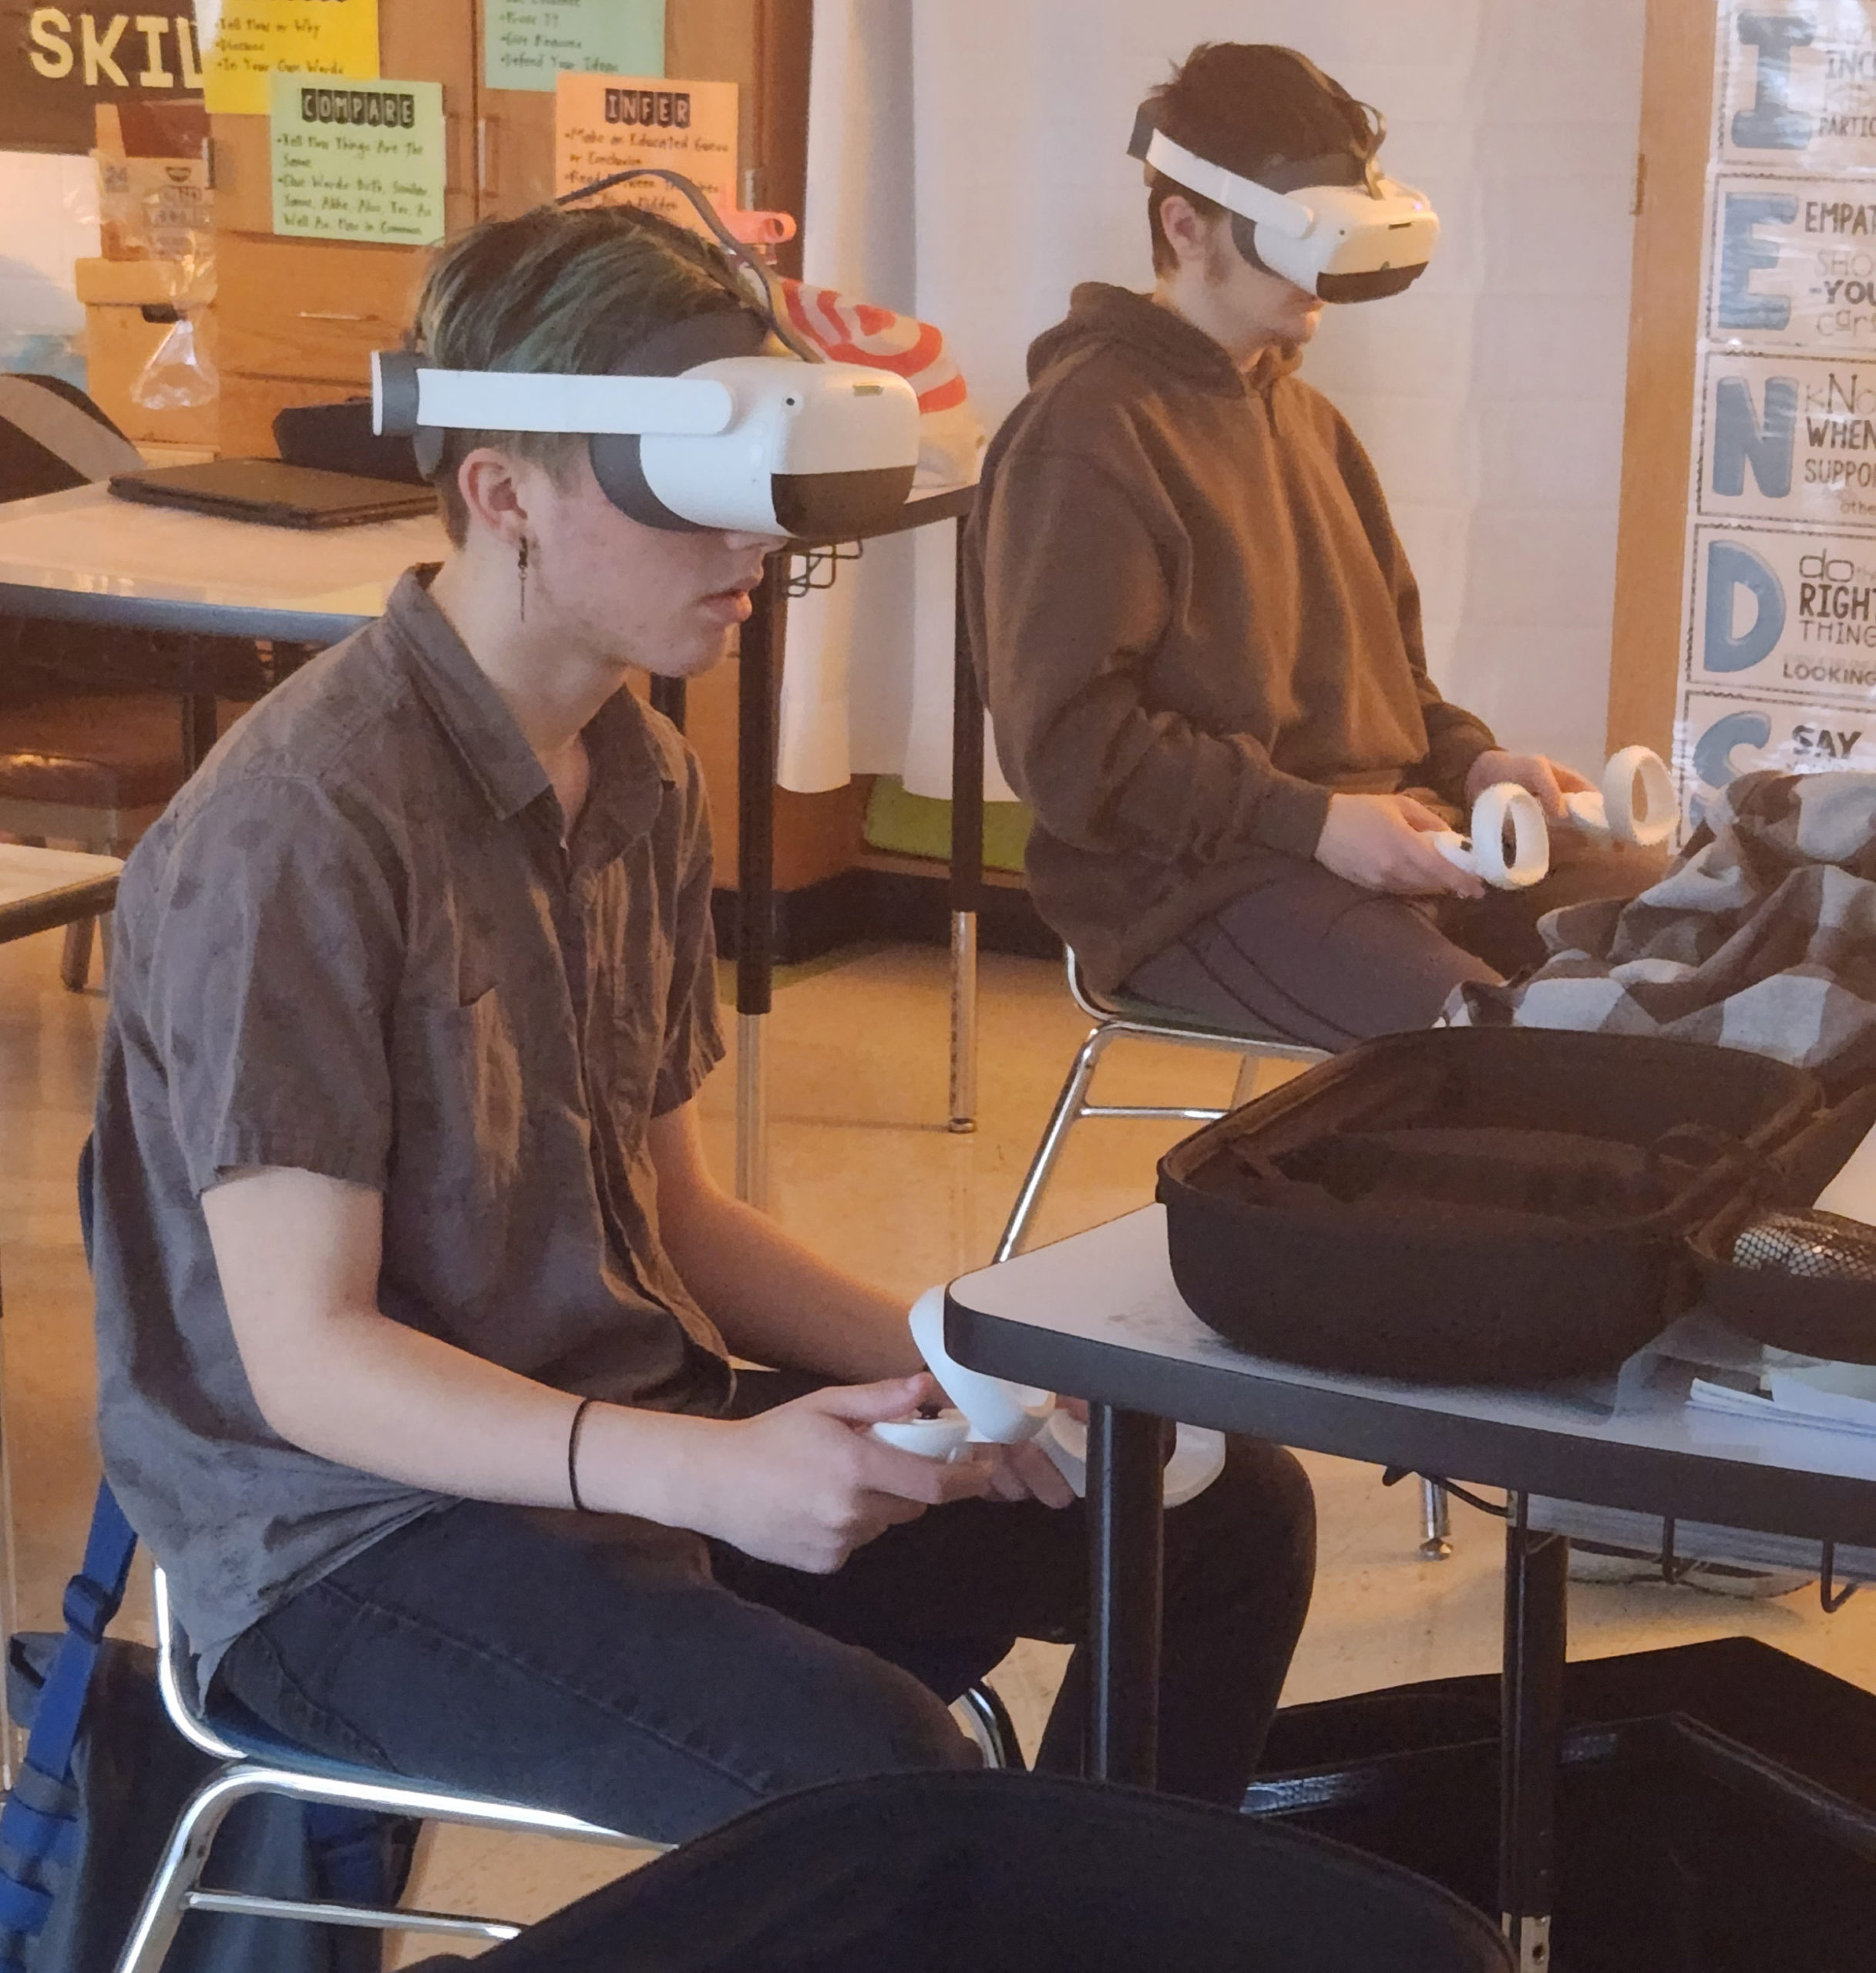 Students from Rensselaer City High School utilize VR in a recent classroom lesson